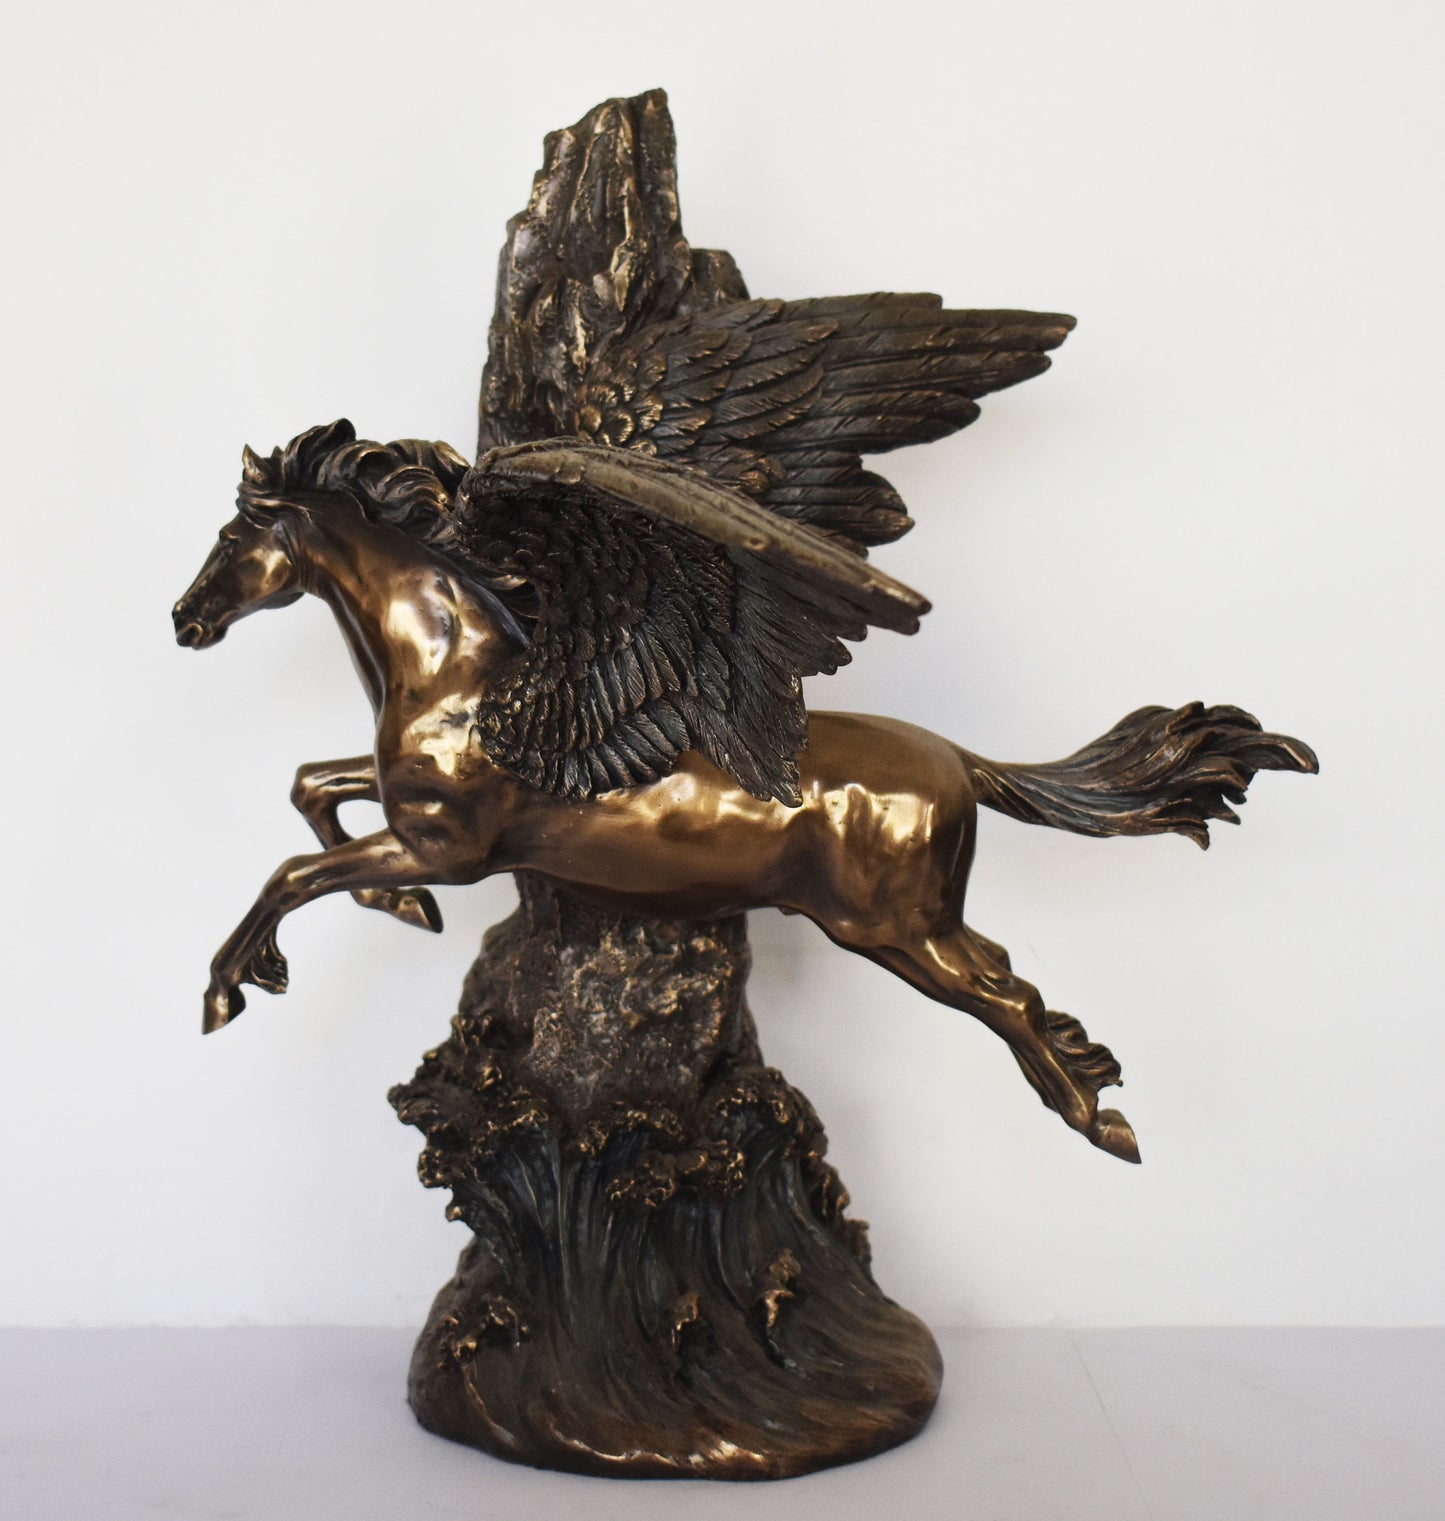 Pegasus - Mythical Immortal Winged Divine Horse - Bellerophon defeats Chimera - Constellation - Cold Cast Bronze Resin